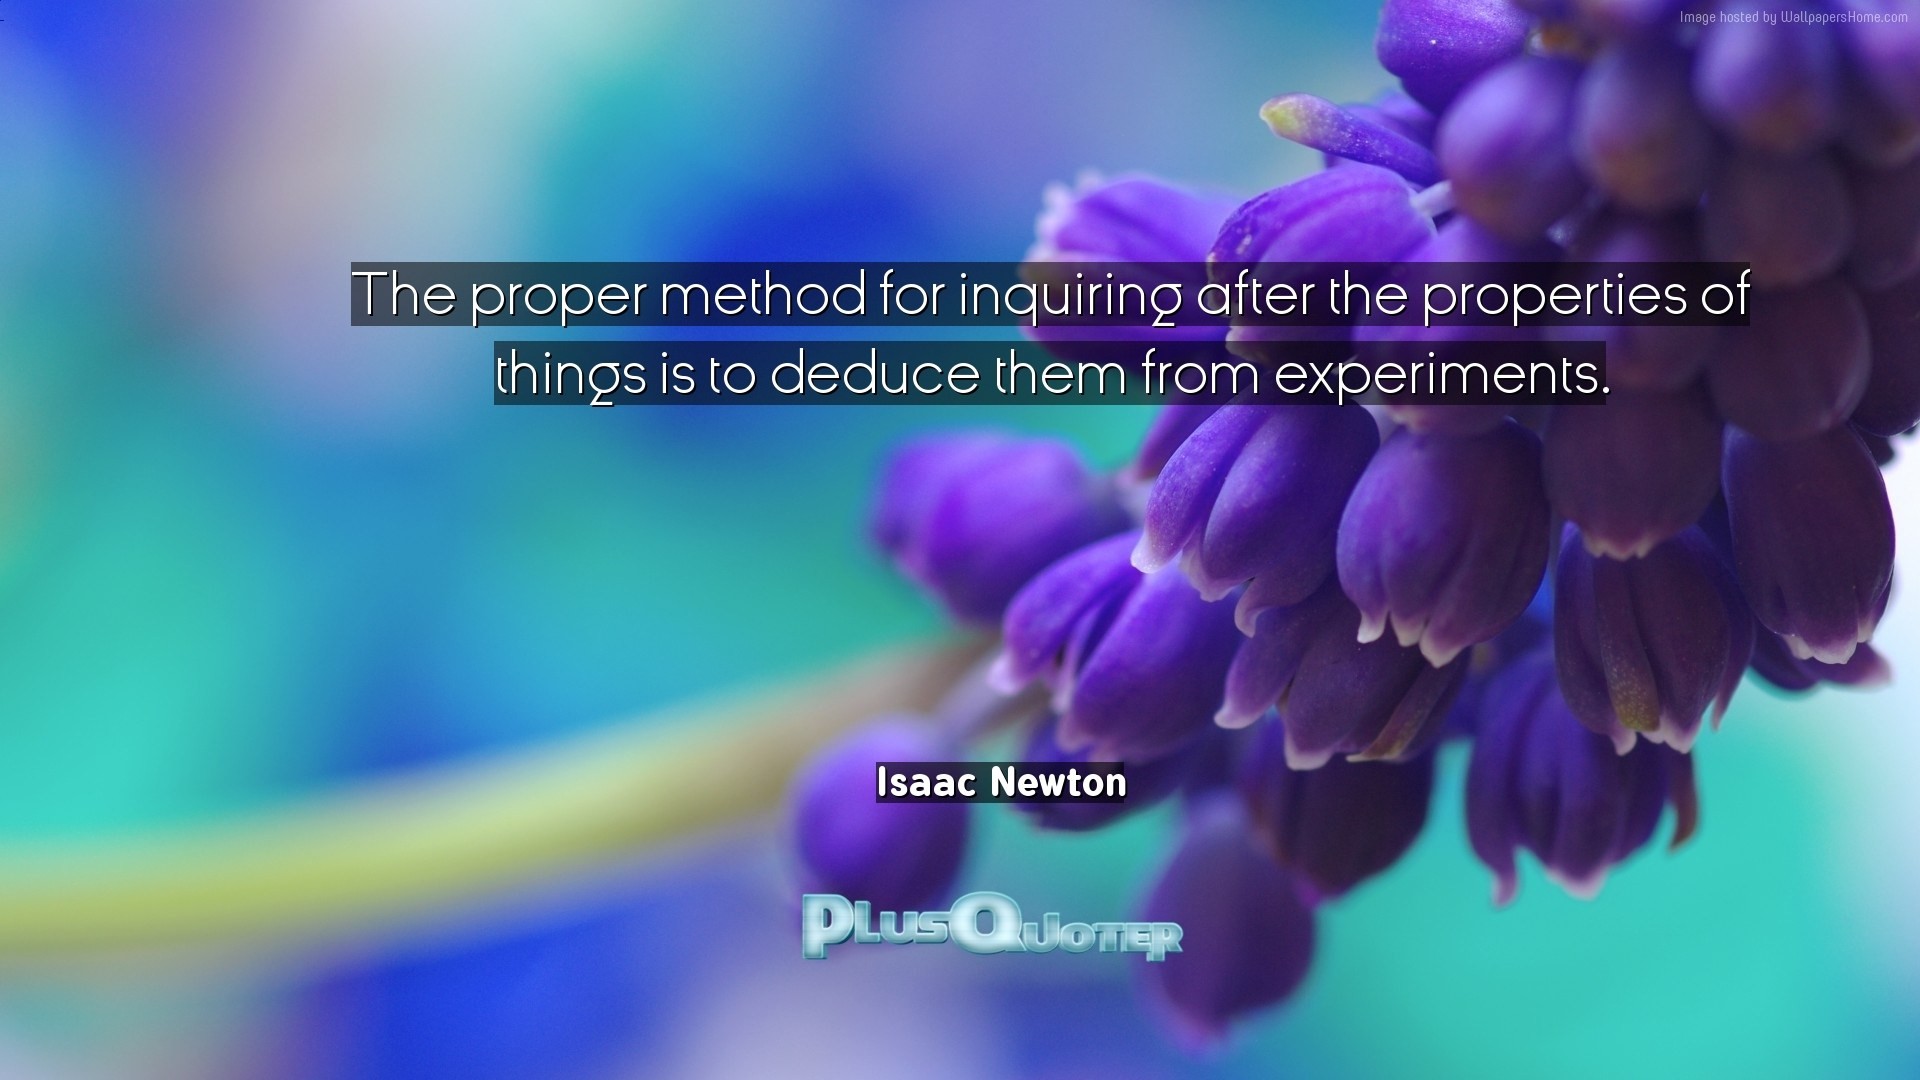 1920x1080 Download Wallpaper with inspirational Quotes- "The proper method for  inquiring after the properties of. “